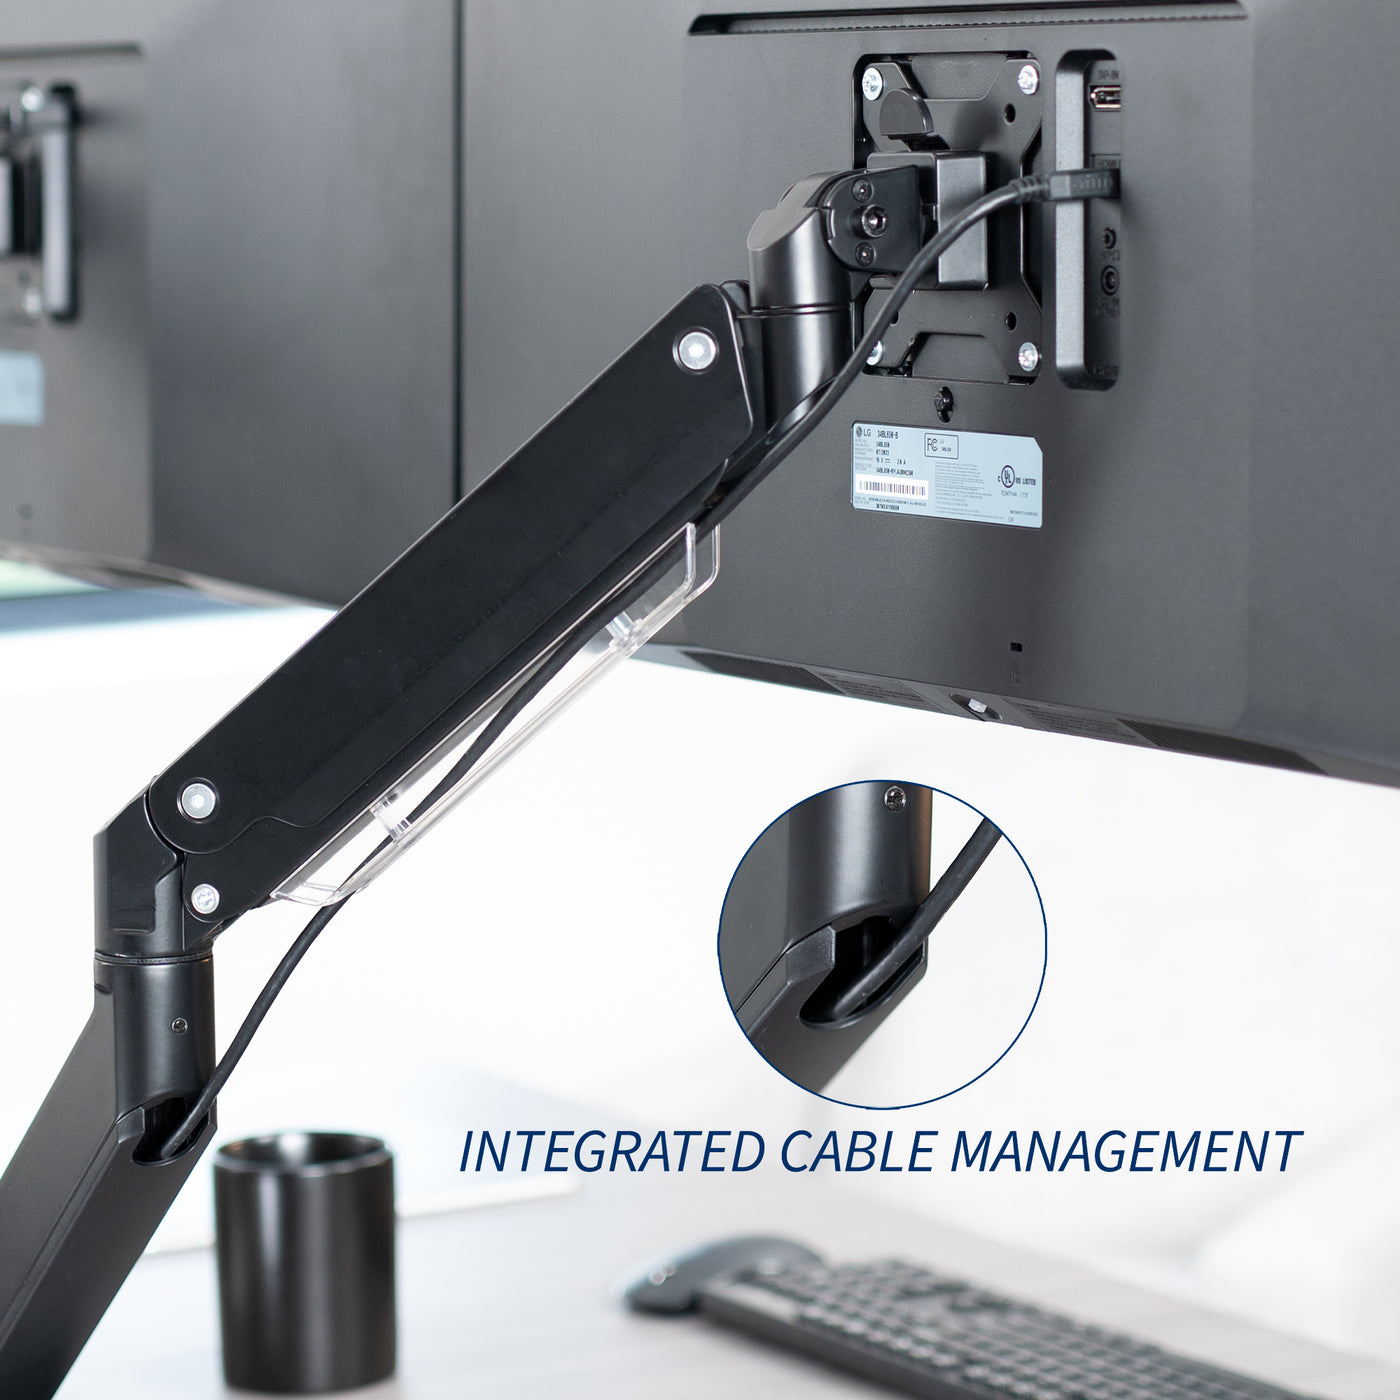 Adjustable pneumatic dual monitor desk mount for ultrawide monitors with integrated cable management.